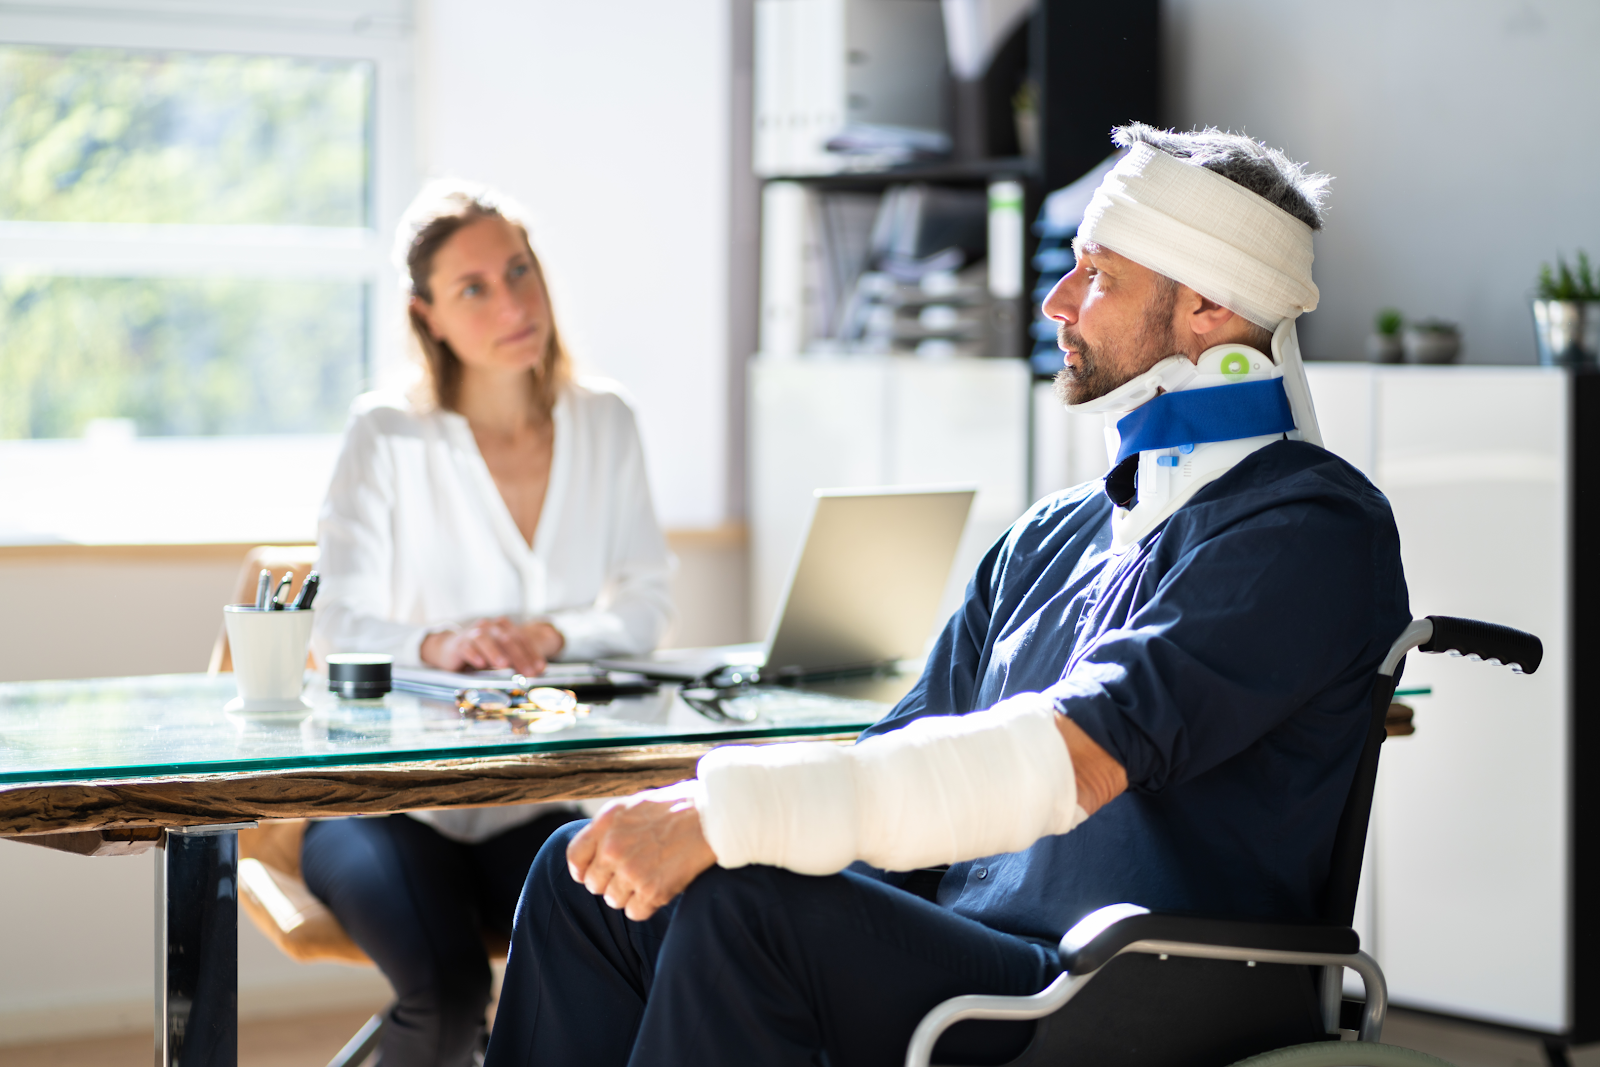 personal injury lawsuits with the help of a lawyer